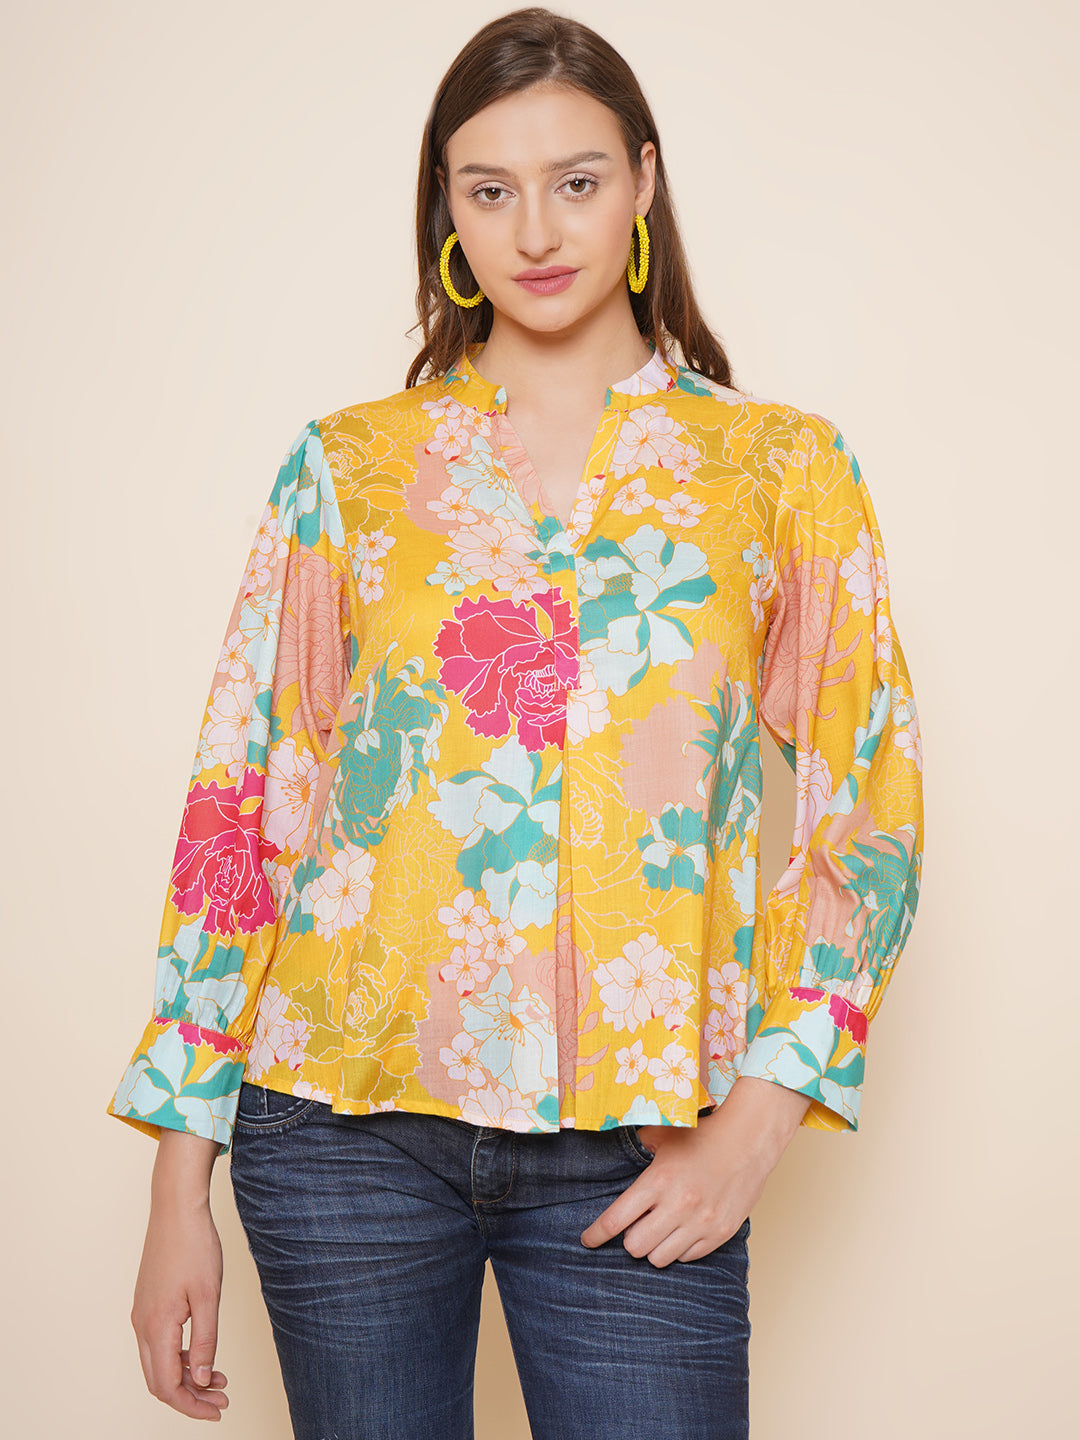 Bhama Couture Yellow Floral Printed Top